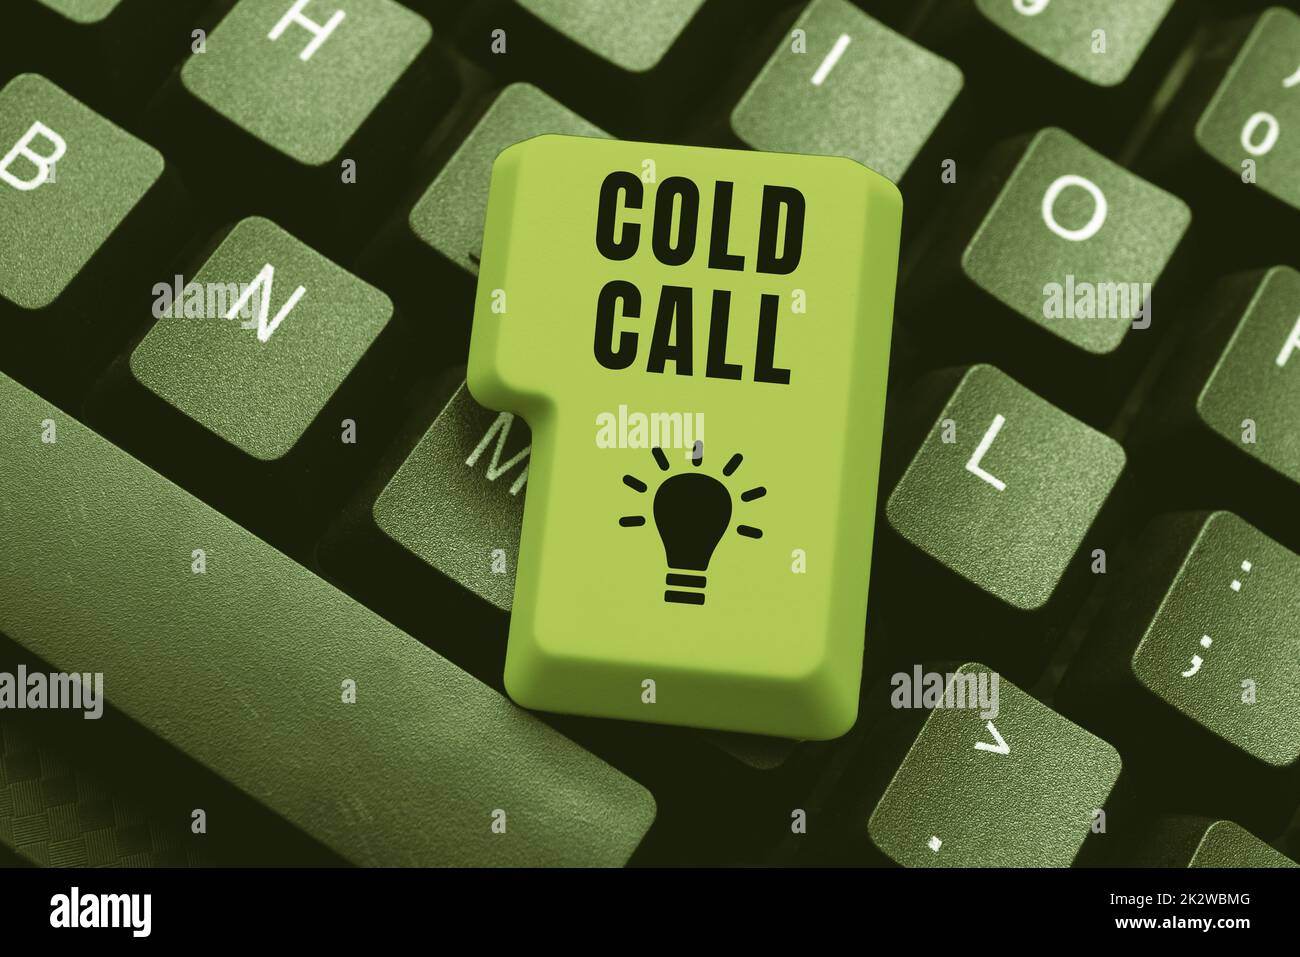 Sign displaying Cold Call. Internet Concept Unsolicited call made by someone trying to sell goods or services -49203 Stock Photo